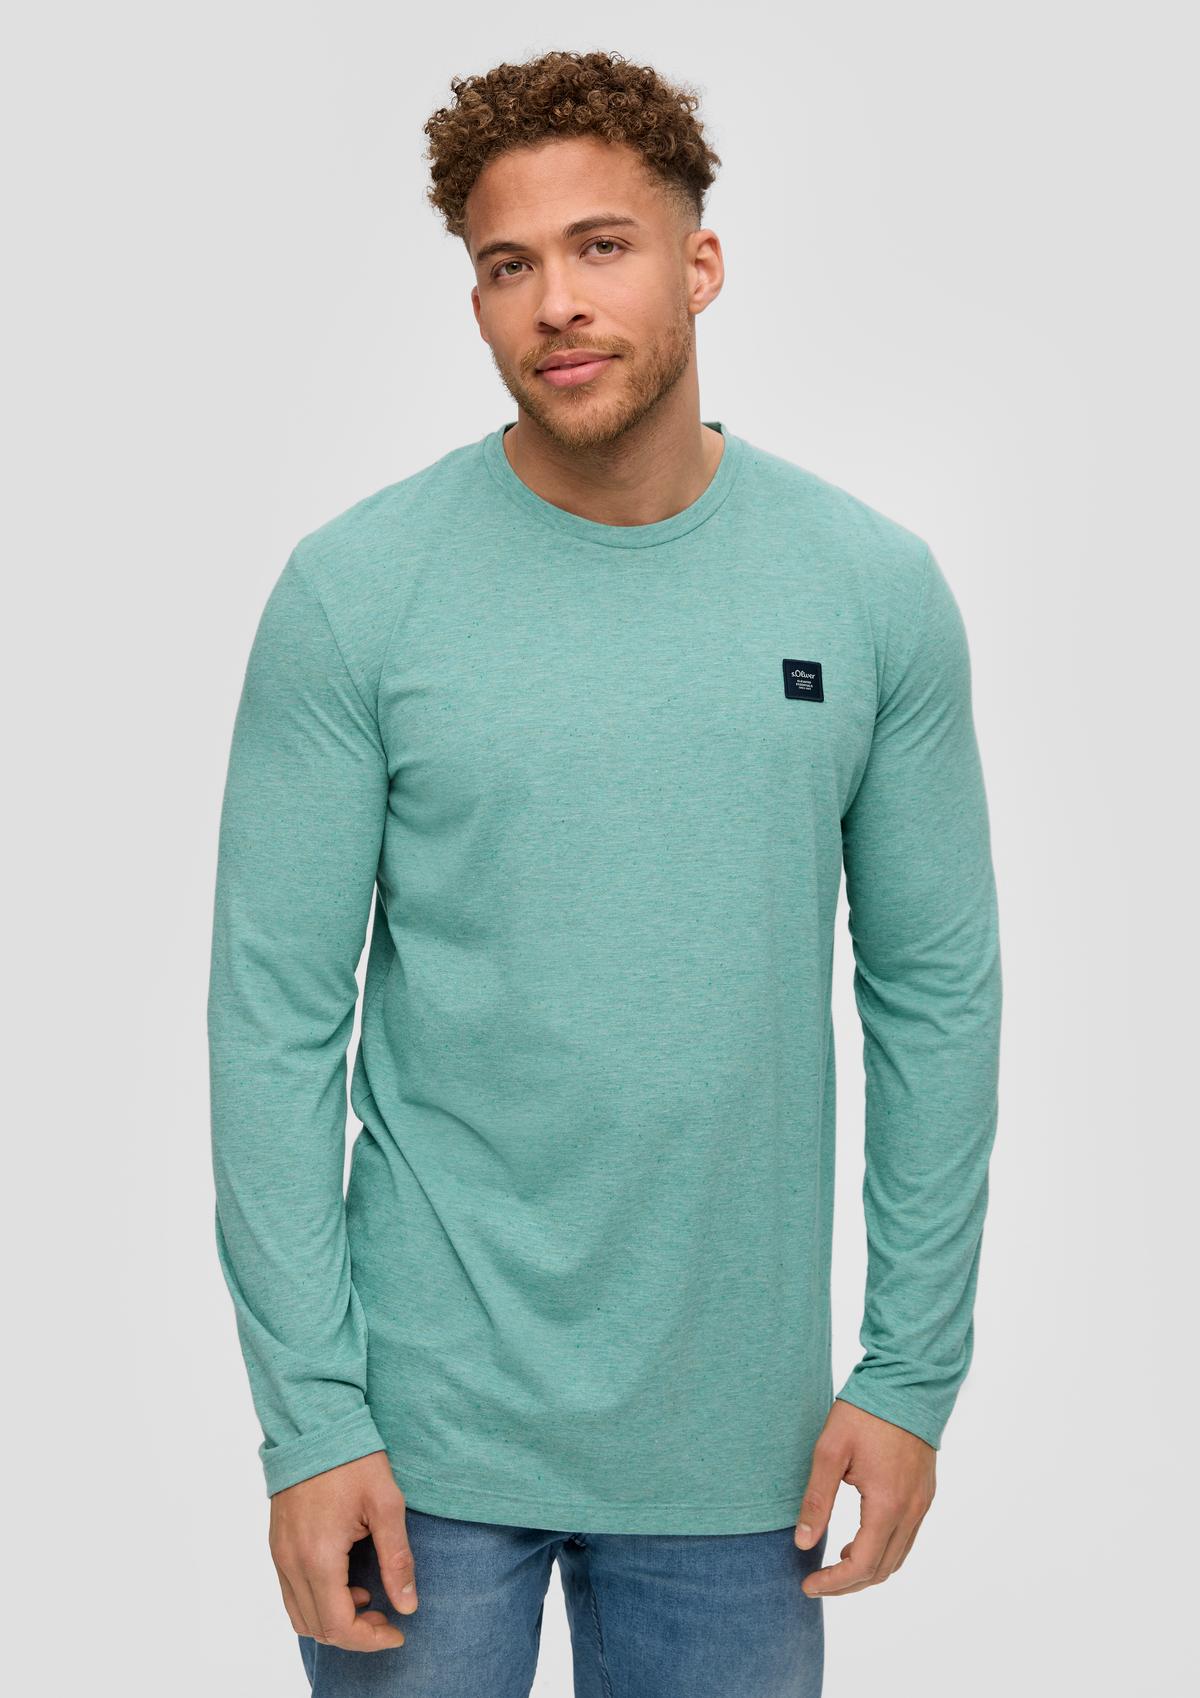 Long sleeve top with sage - a rolled hem green